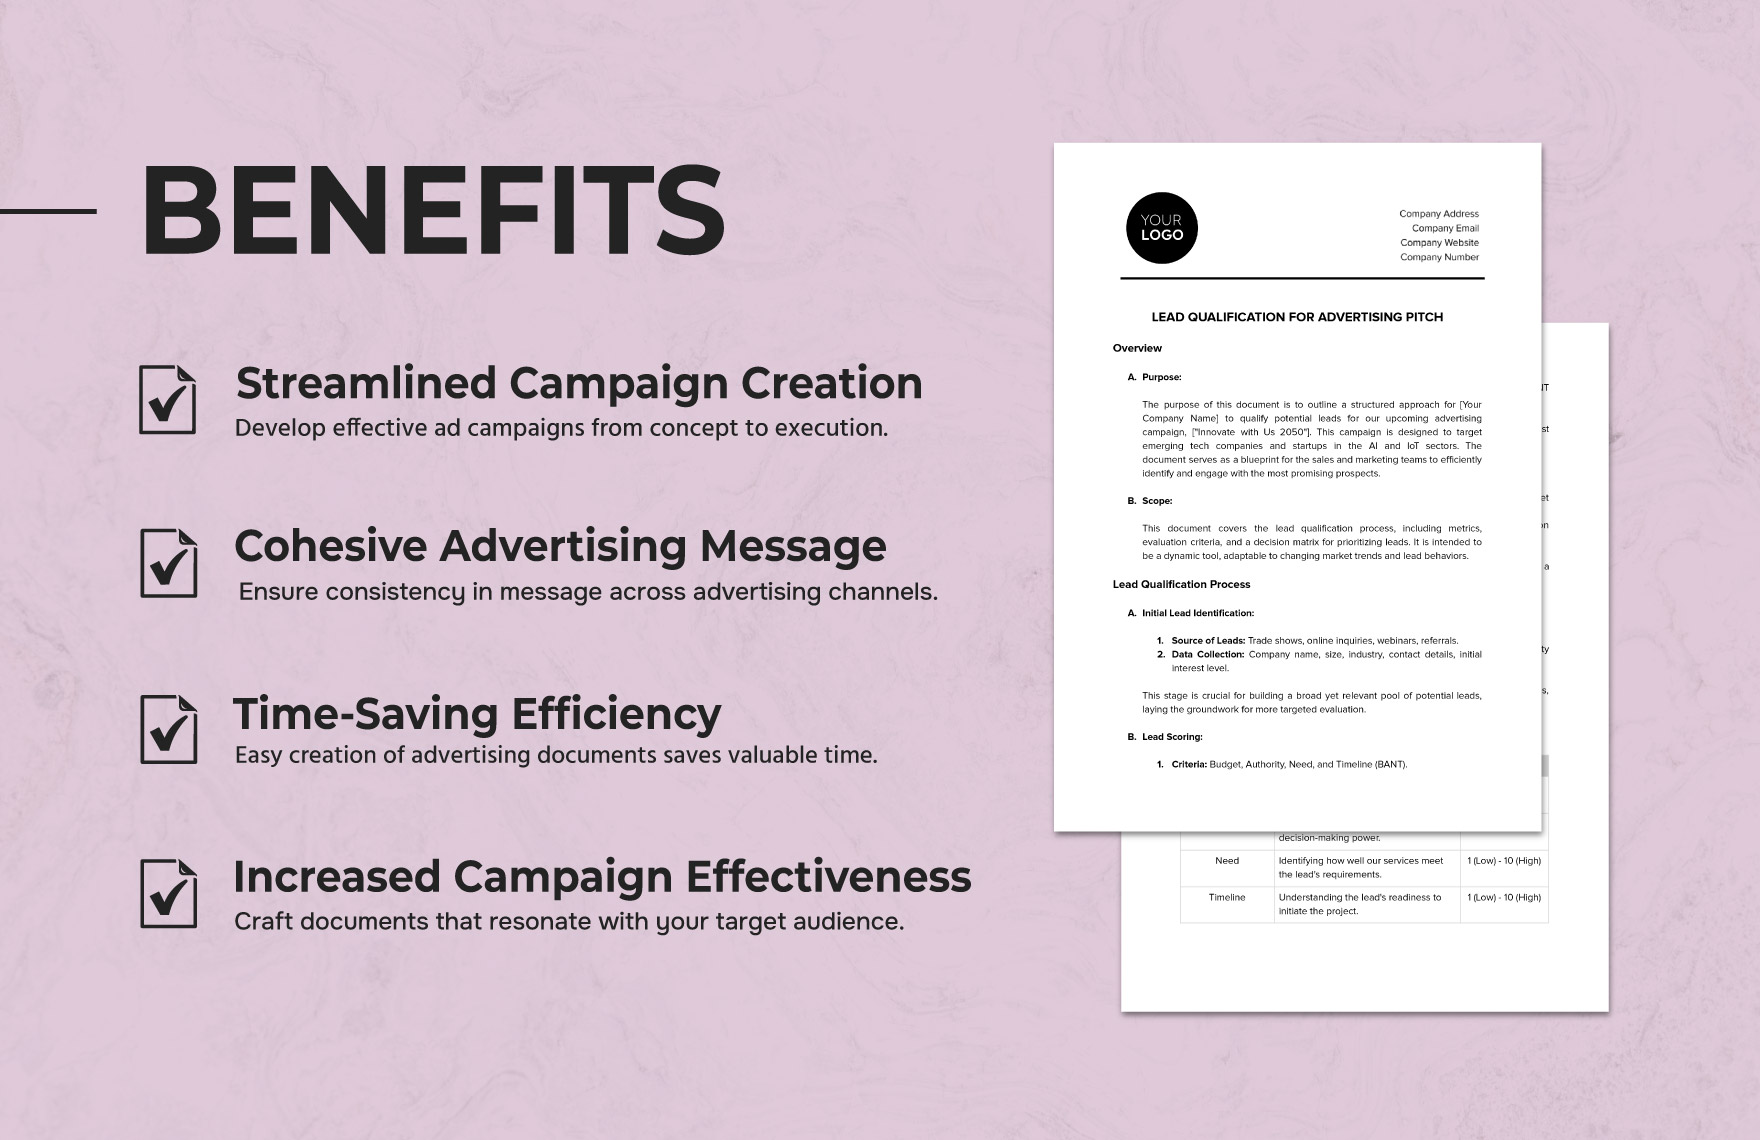 Lead Qualification for Advertising Pitch Template